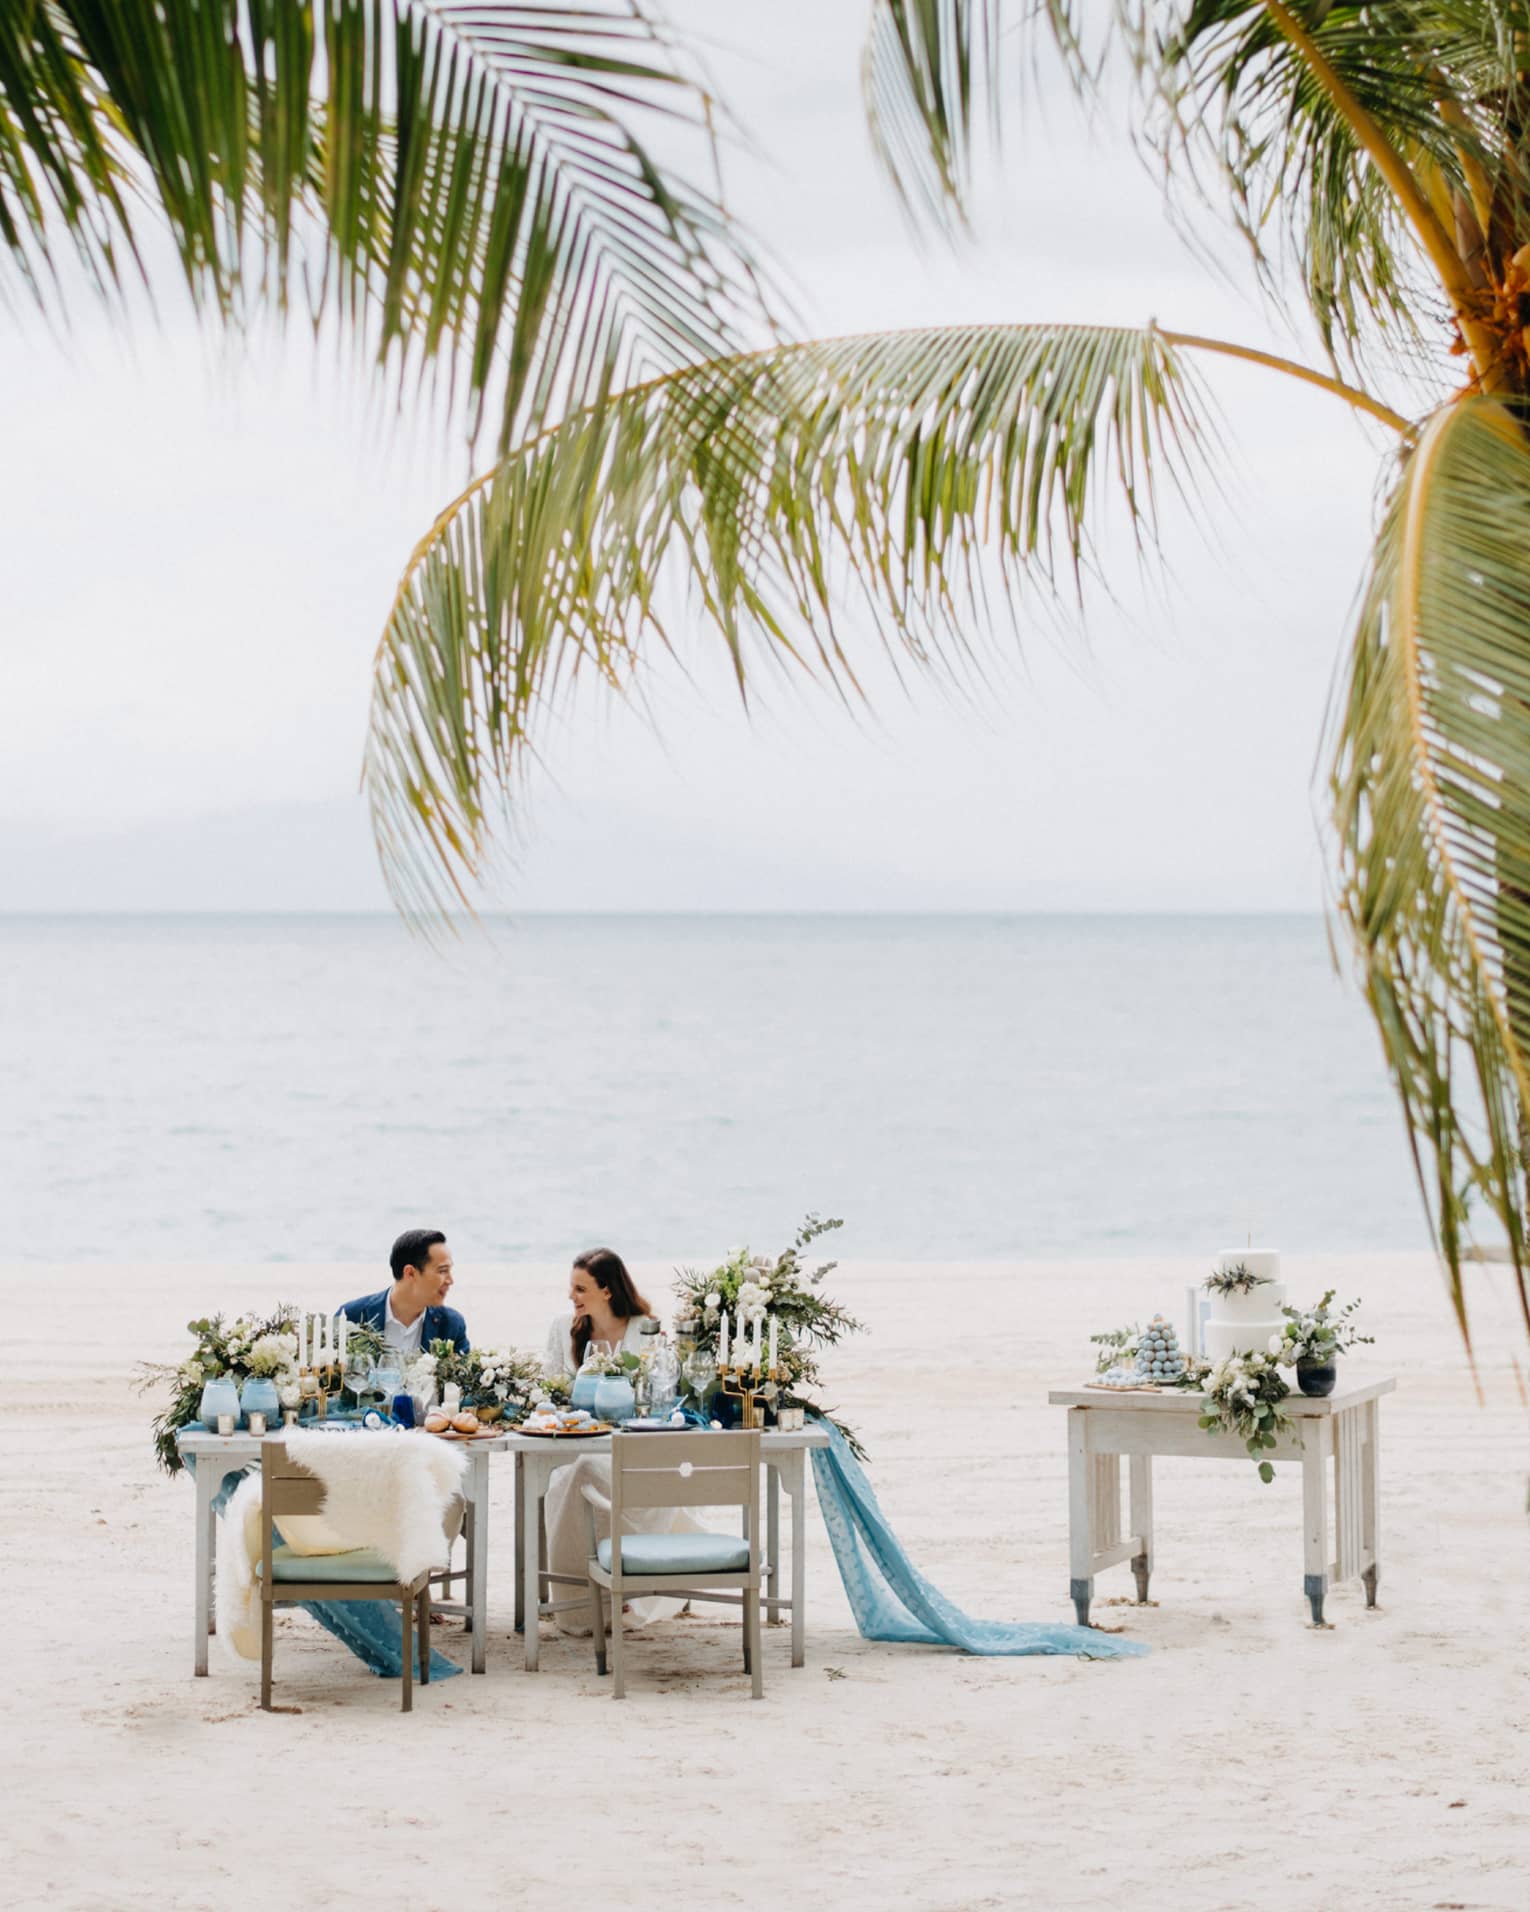 Smiling couple at private dining on white sand beach past palm leaves